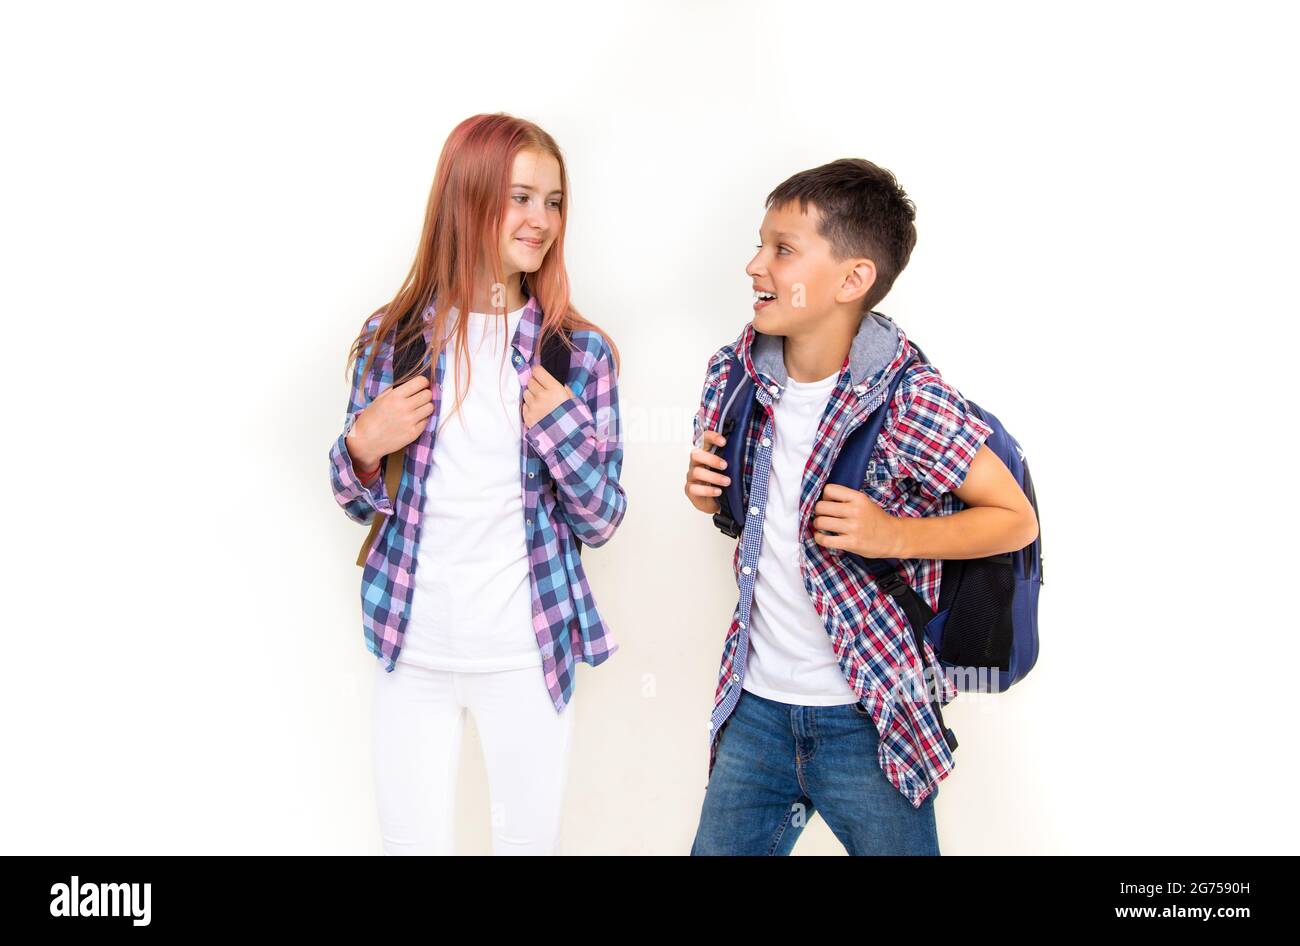 Boy and girl teenager 11 years old schoolboy and schoolgirl, looking on each other on white background with backpacks and smiling. Dressed in plaid sh Stock Photo